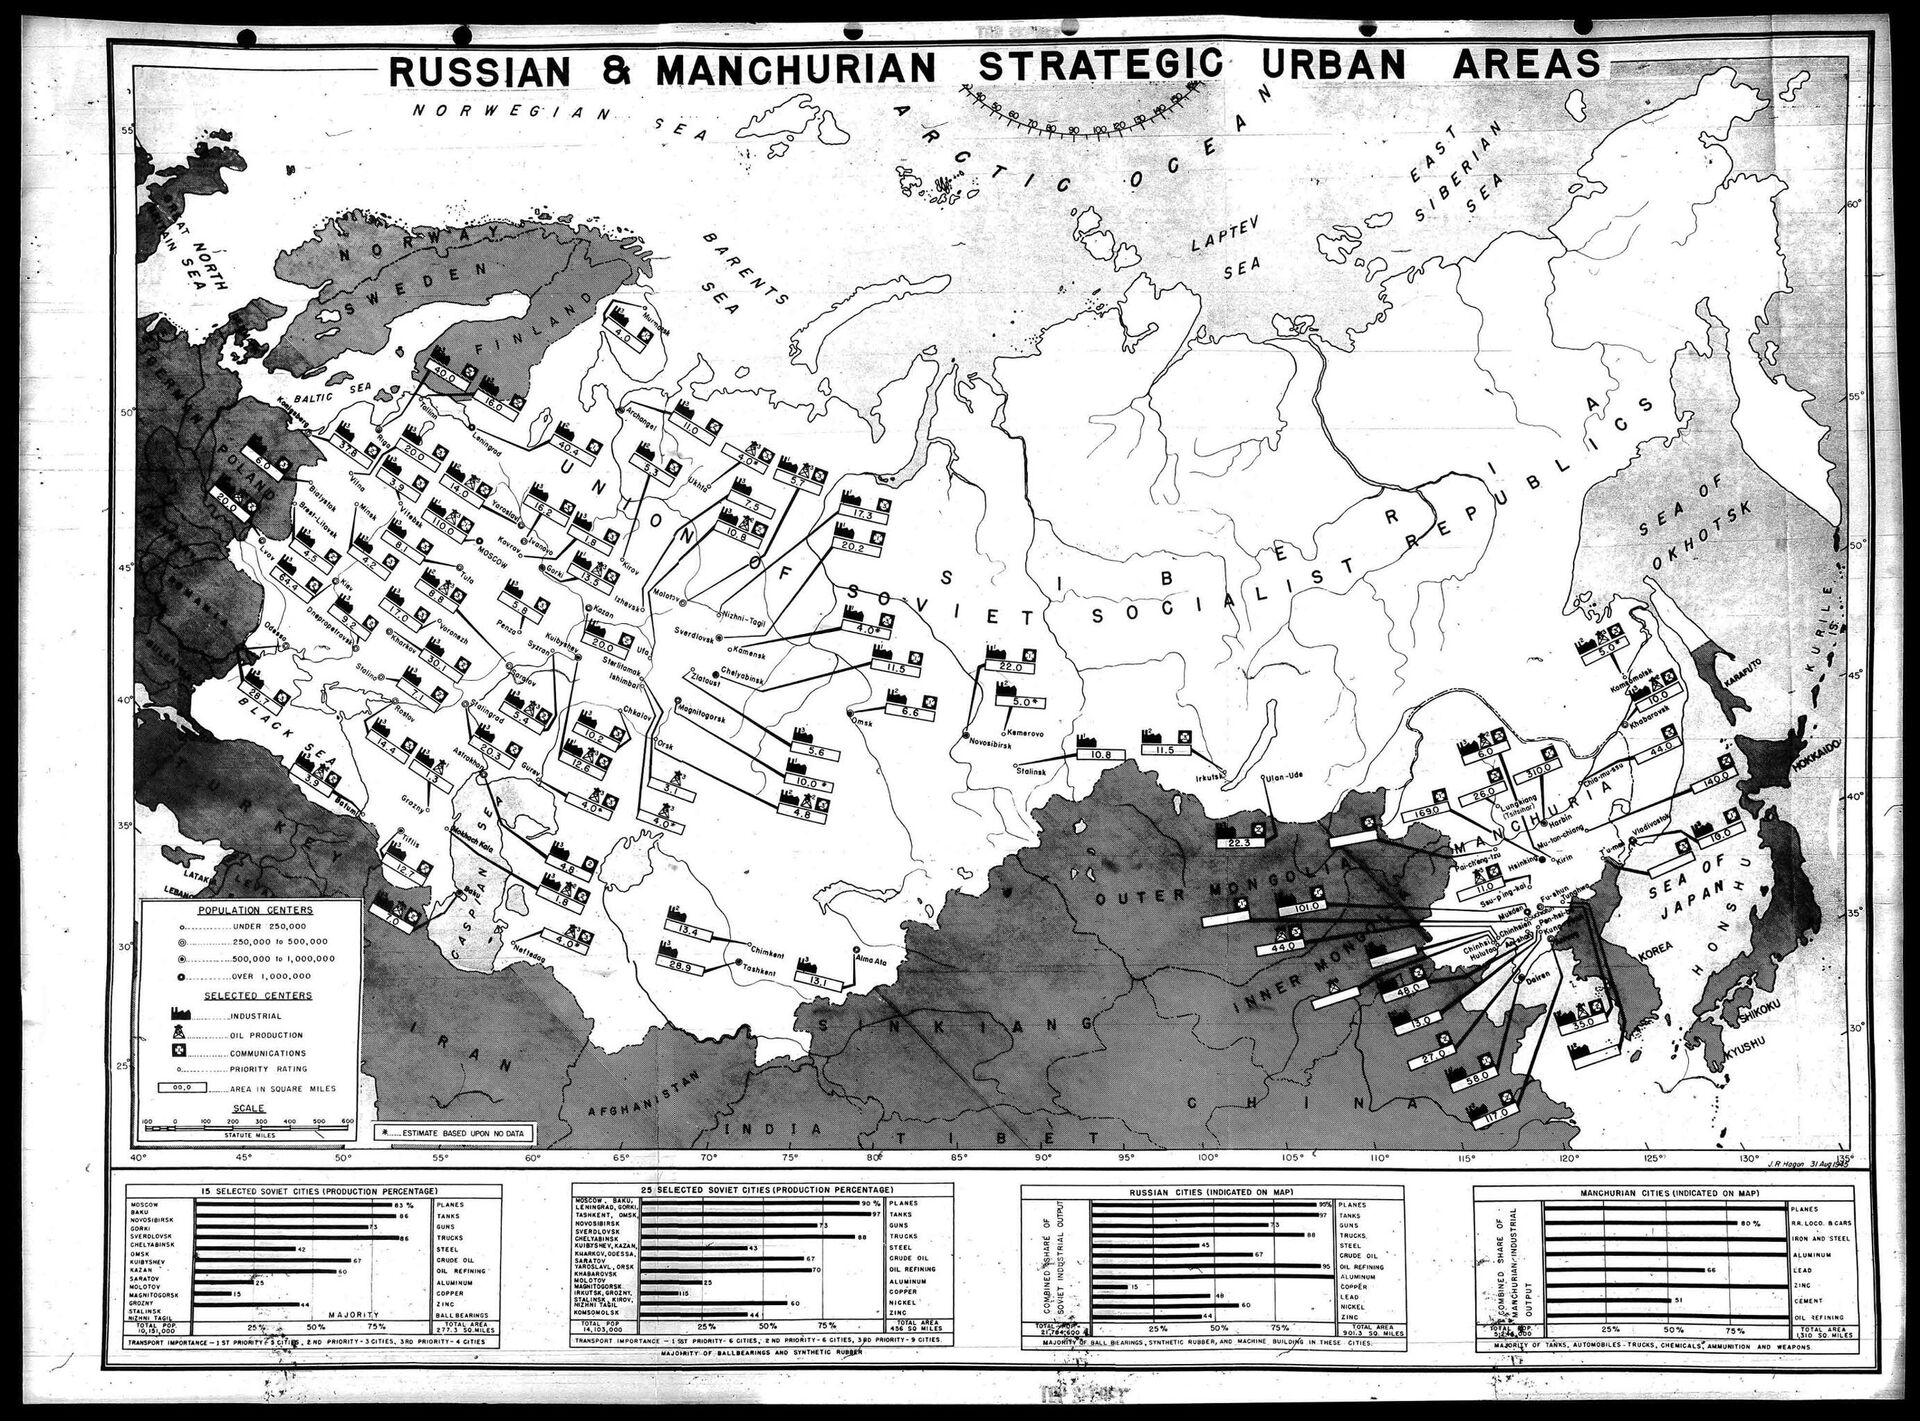 August 1945 US Army Air Force Plan to incinerate the USSR (including Soviet Ukraine) using conventional and nuclear weapons. - Sputnik International, 1920, 03.11.2022